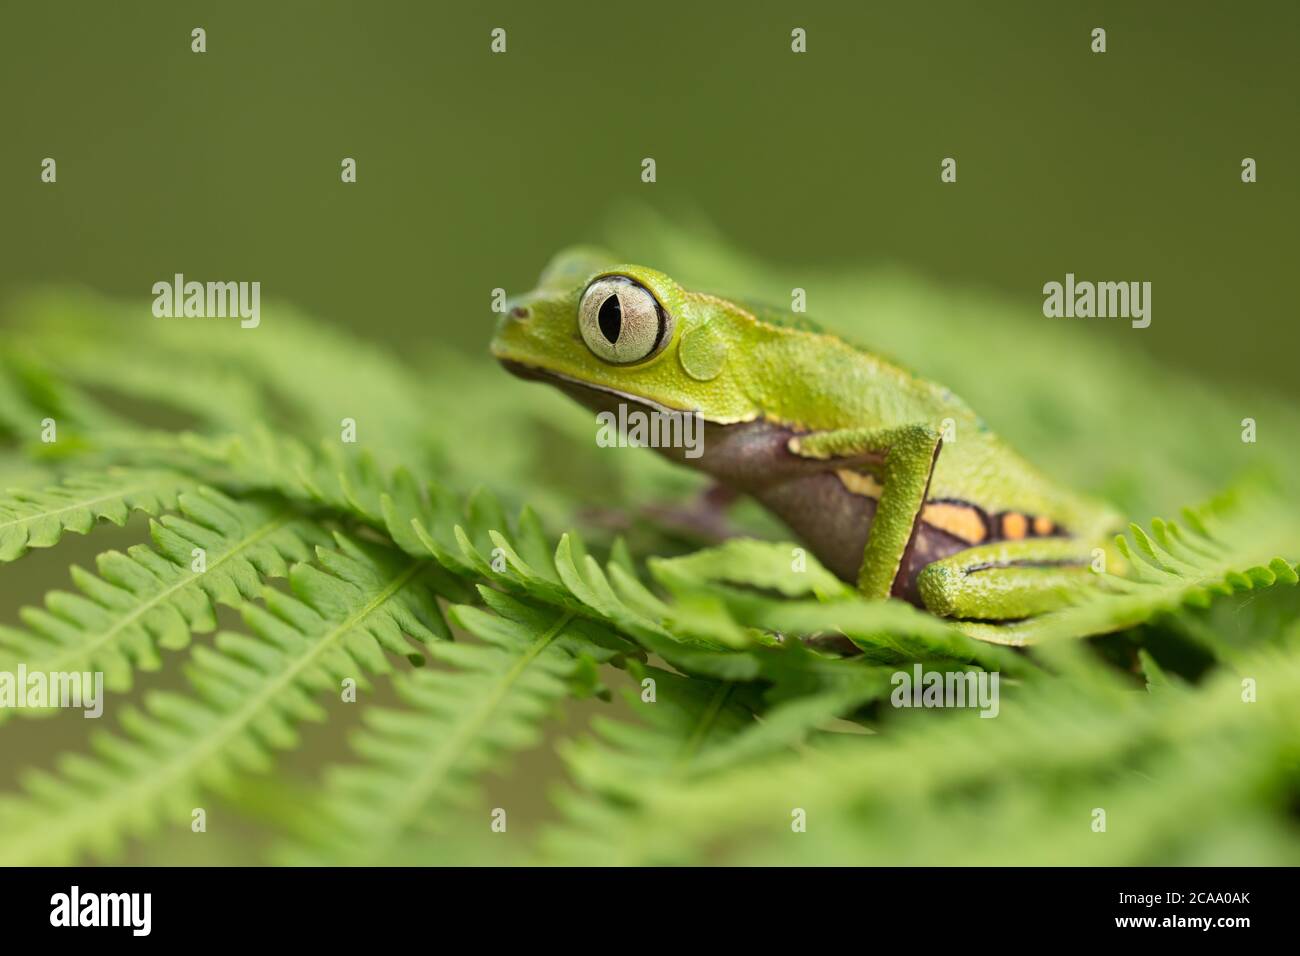 The white-lined leaf frog (Phyllomedusa vaillantii) is a species of frog in the family Phyllomedusidae. It is found in northern South America. Stock Photo